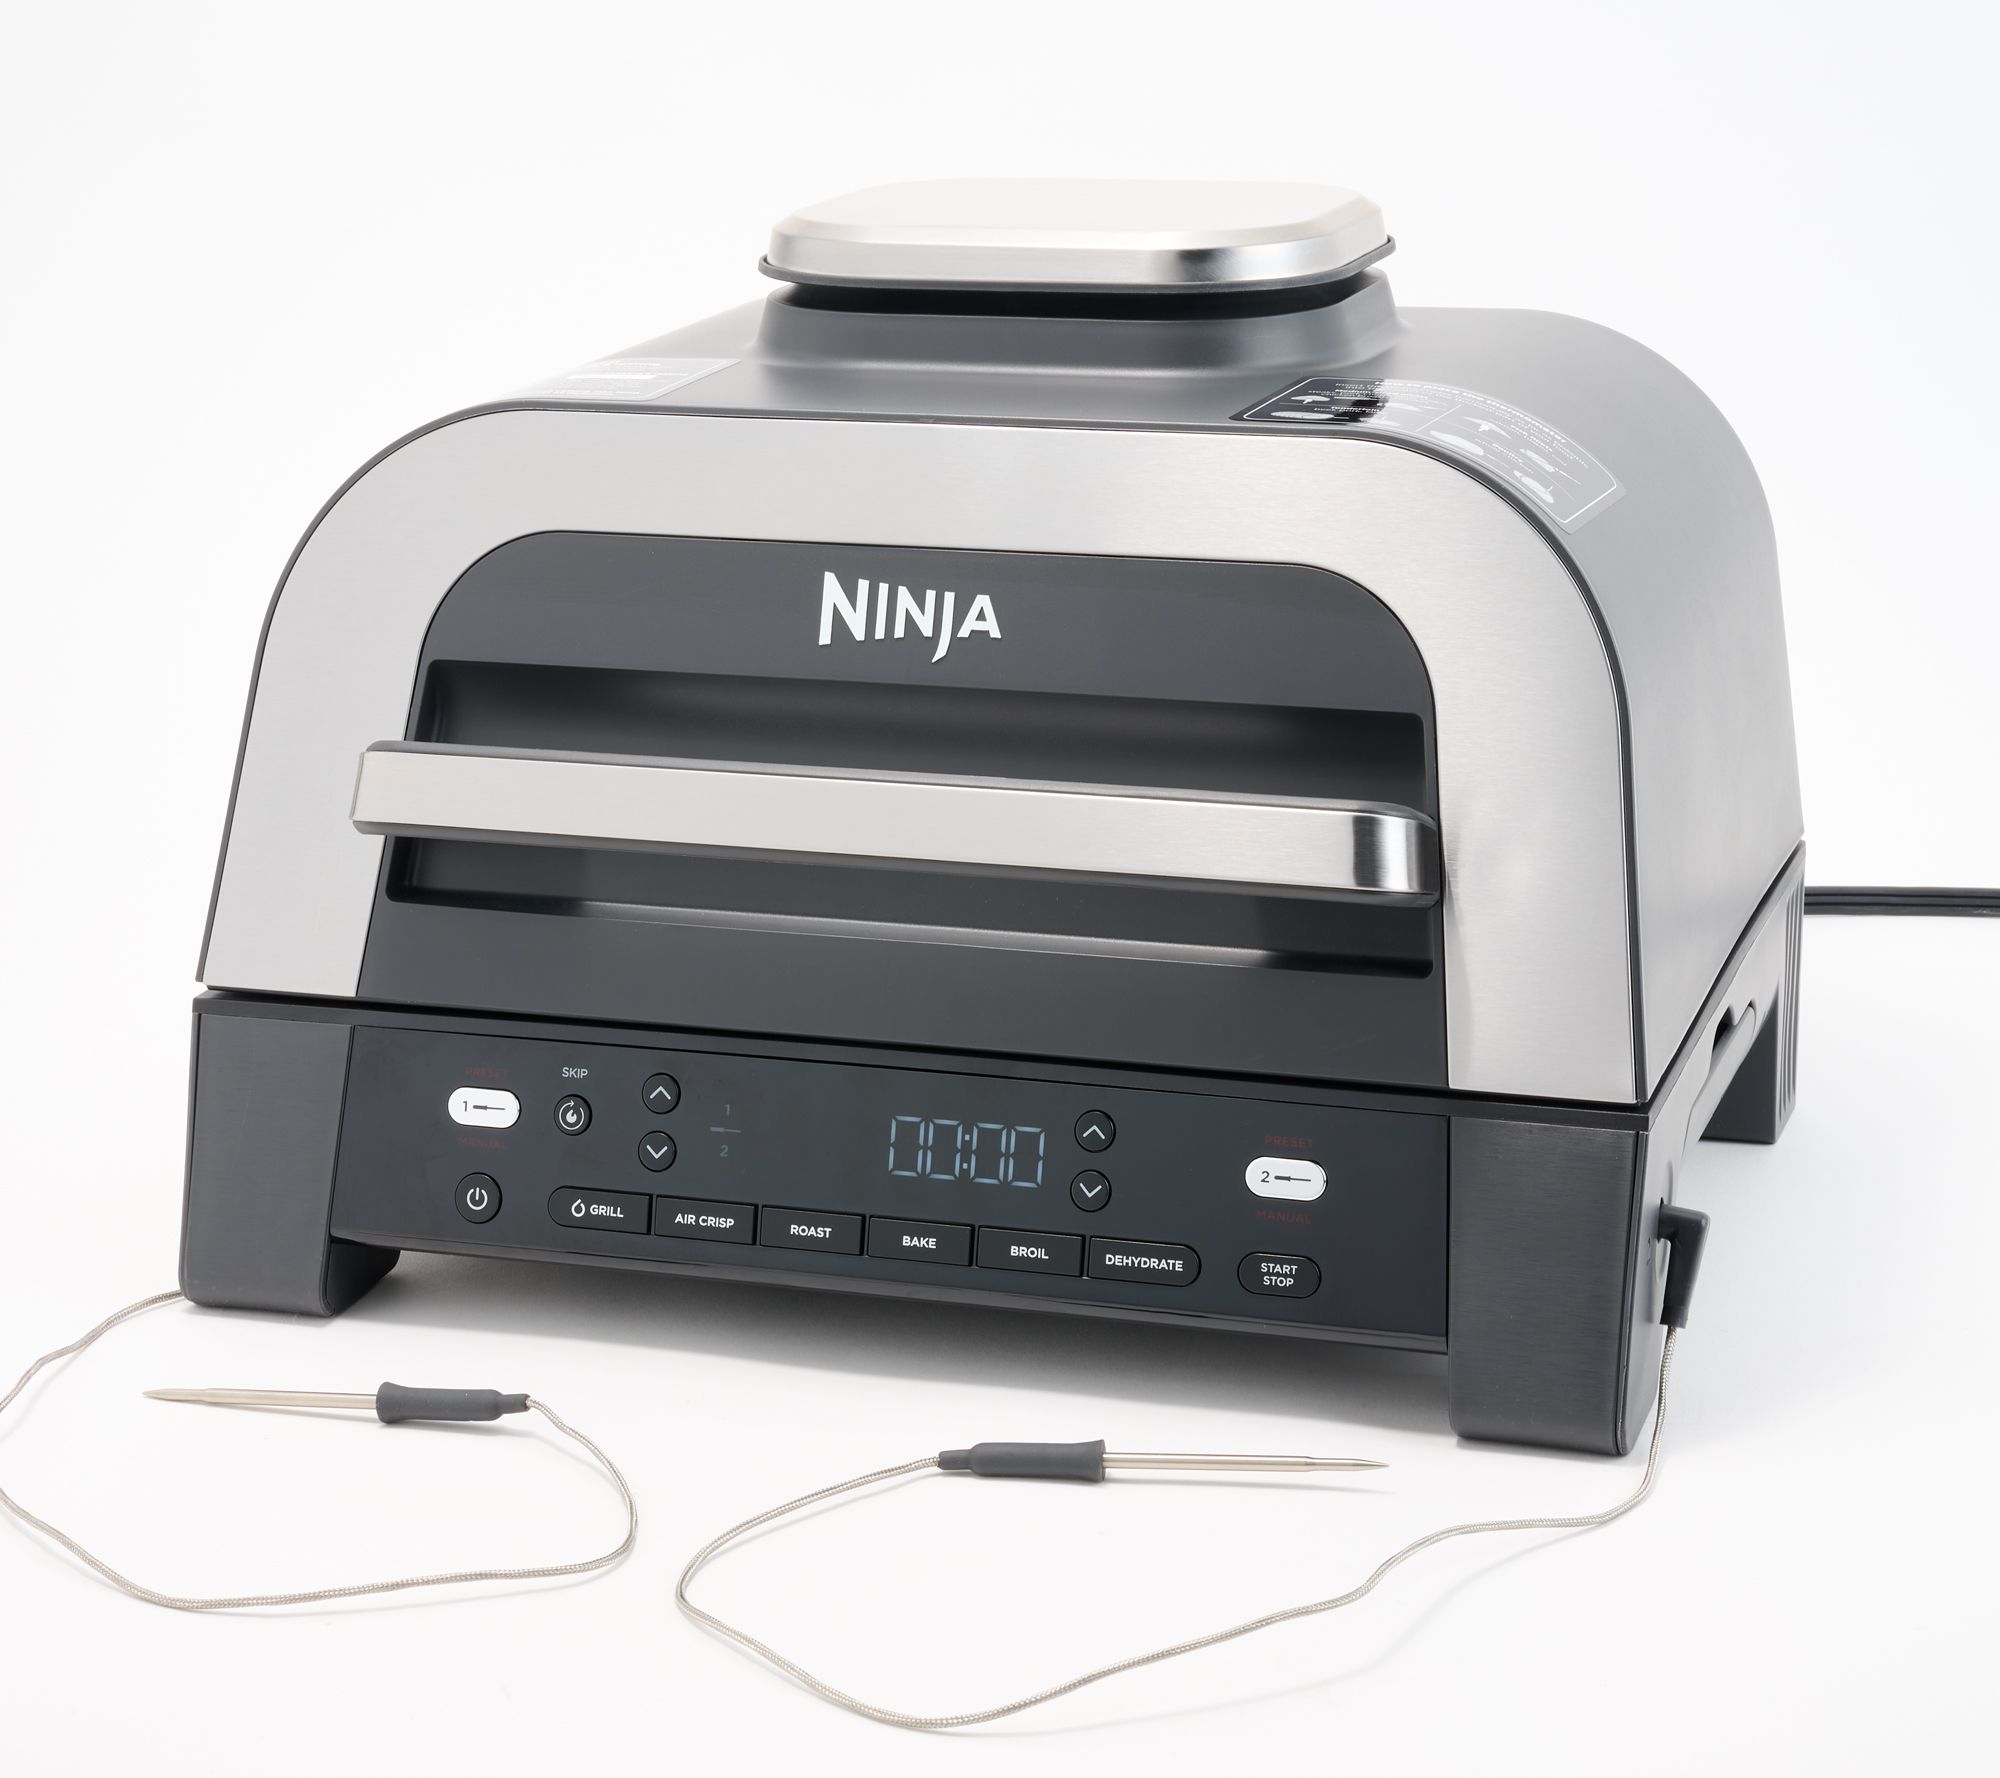 Ninja Foodi Grill Review: Here's how it actually works - Reviewed